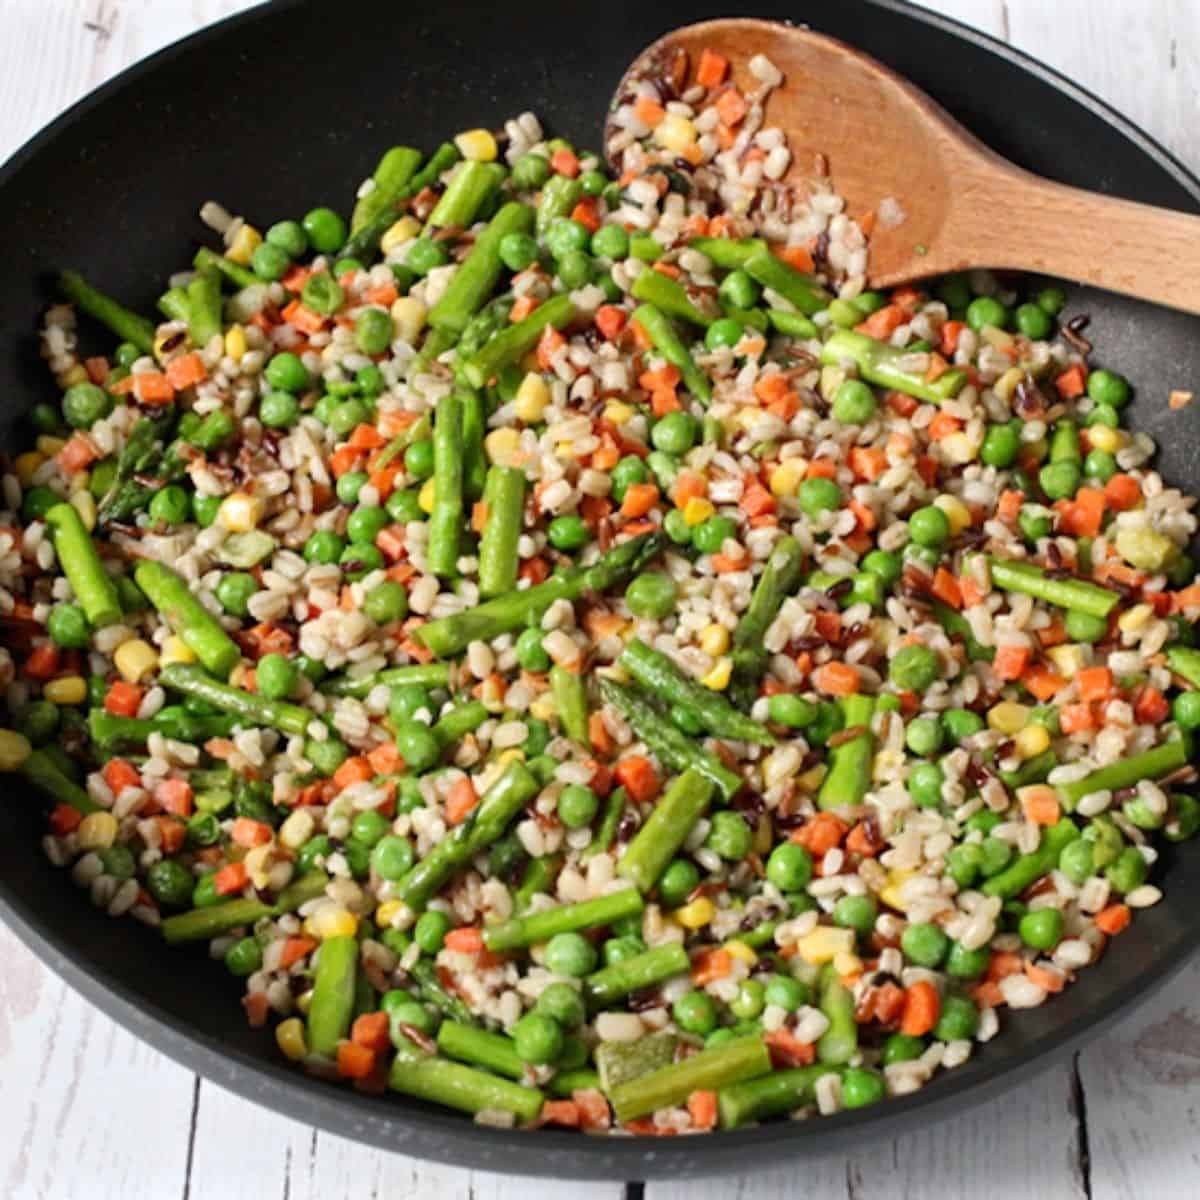 A large skillet with a colorful mixture of grains and vegetables and a wooden spoon resting to the side.